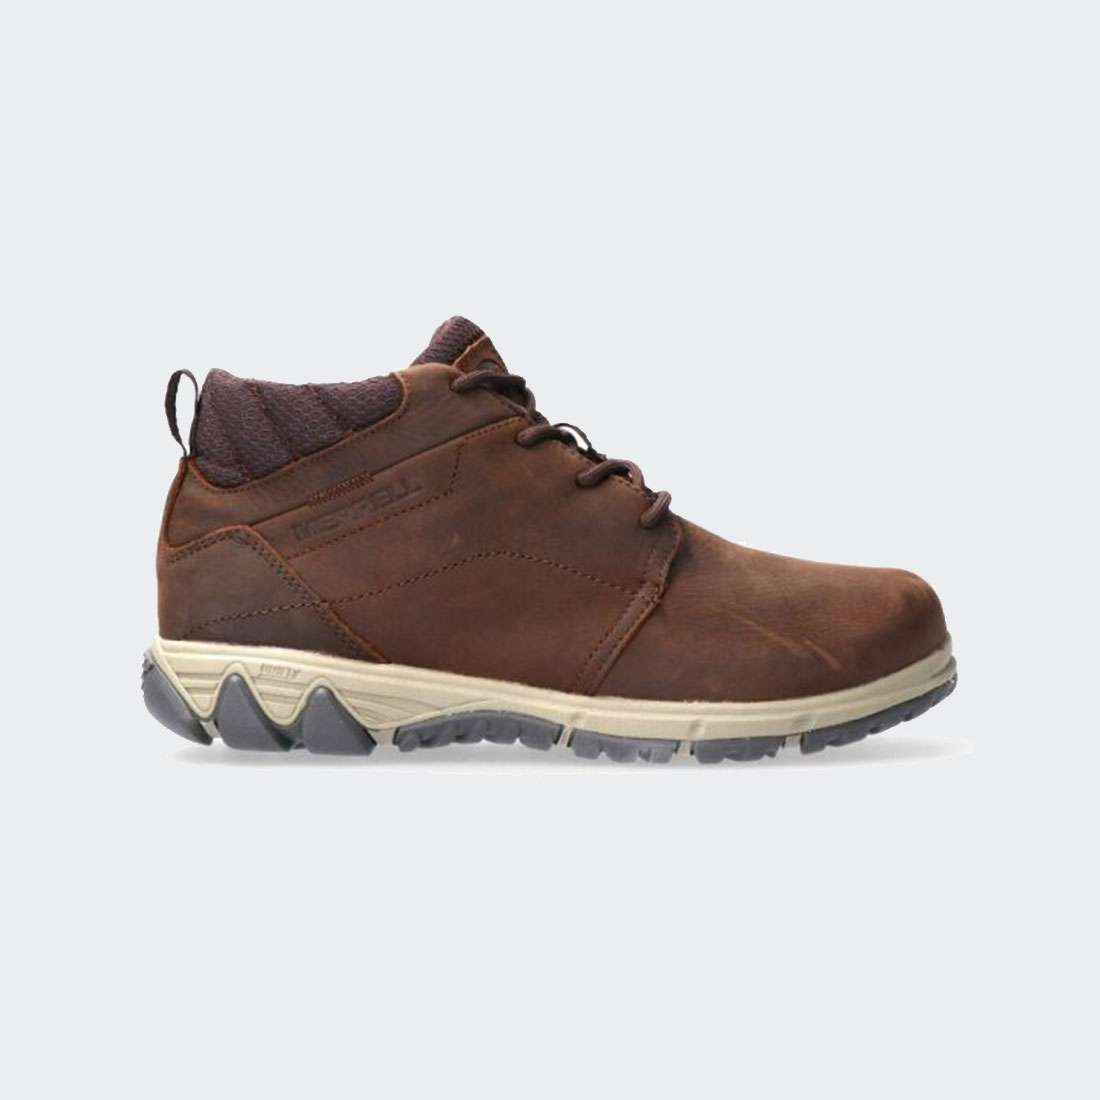 BOTA MERRELL ALL OUT FUSION CLAY/CLAY